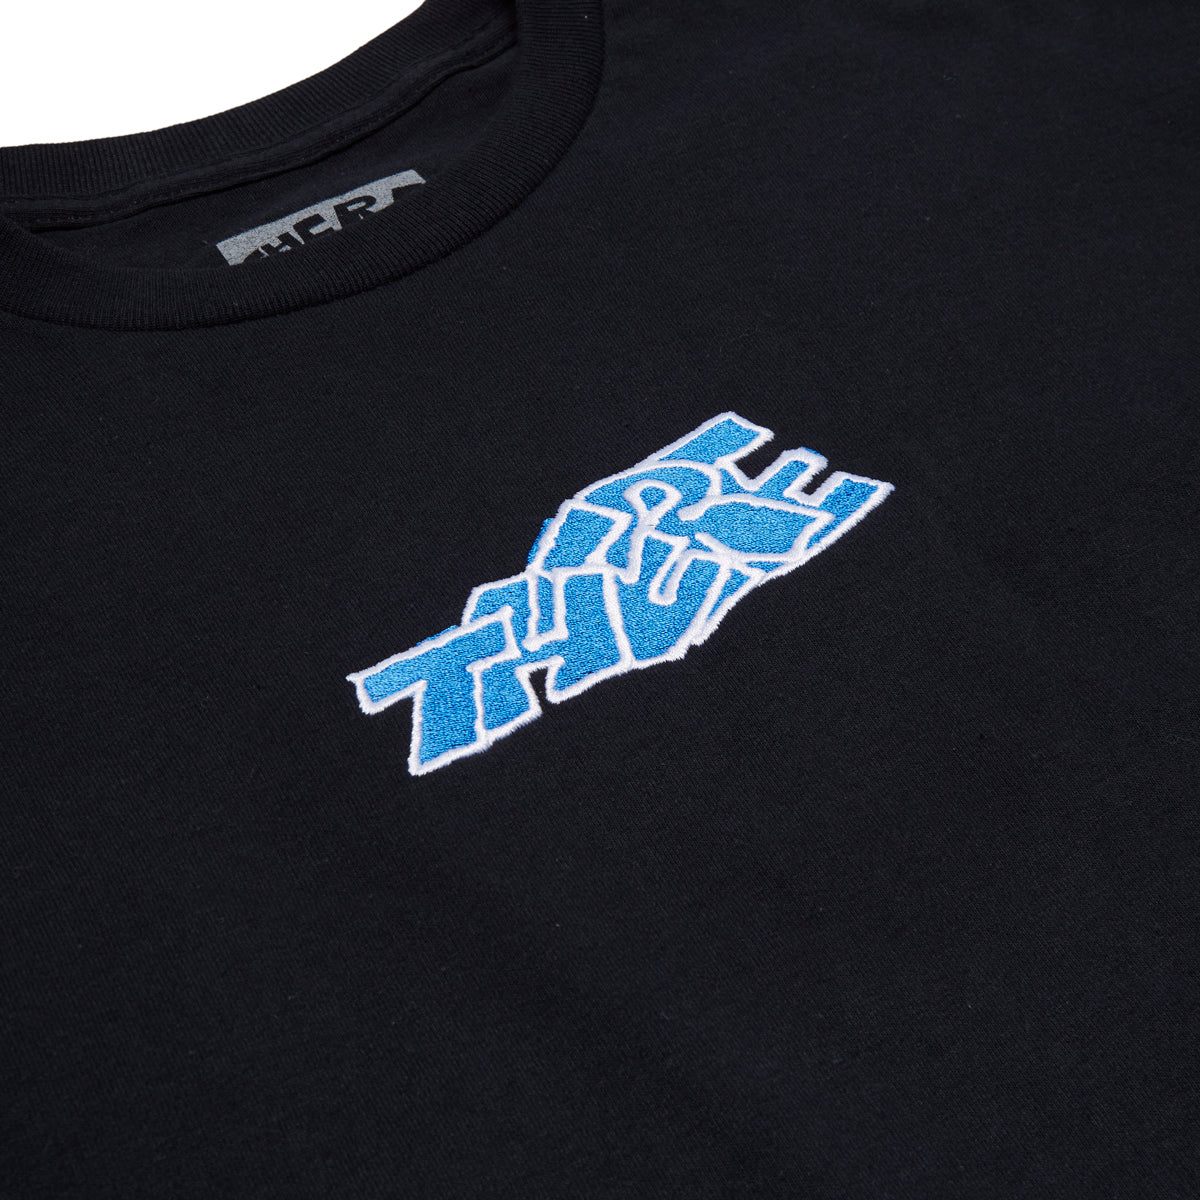 There Blocky T-Shirt - Black/White/Blue image 2